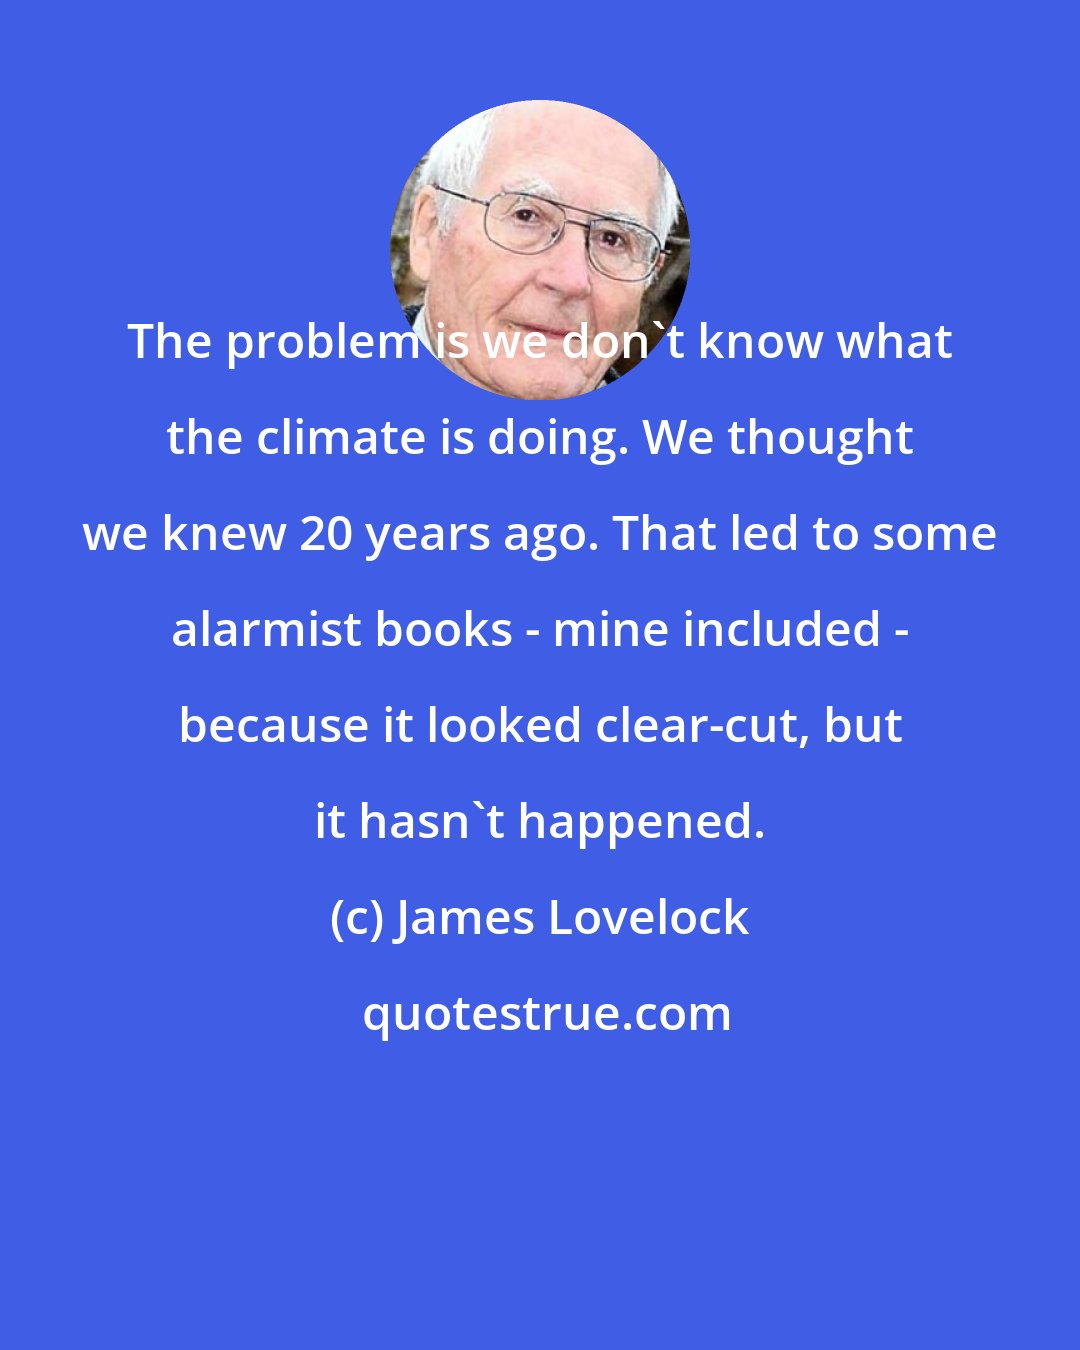 James Lovelock: The problem is we don't know what the climate is doing. We thought we knew 20 years ago. That led to some alarmist books - mine included - because it looked clear-cut, but it hasn't happened.